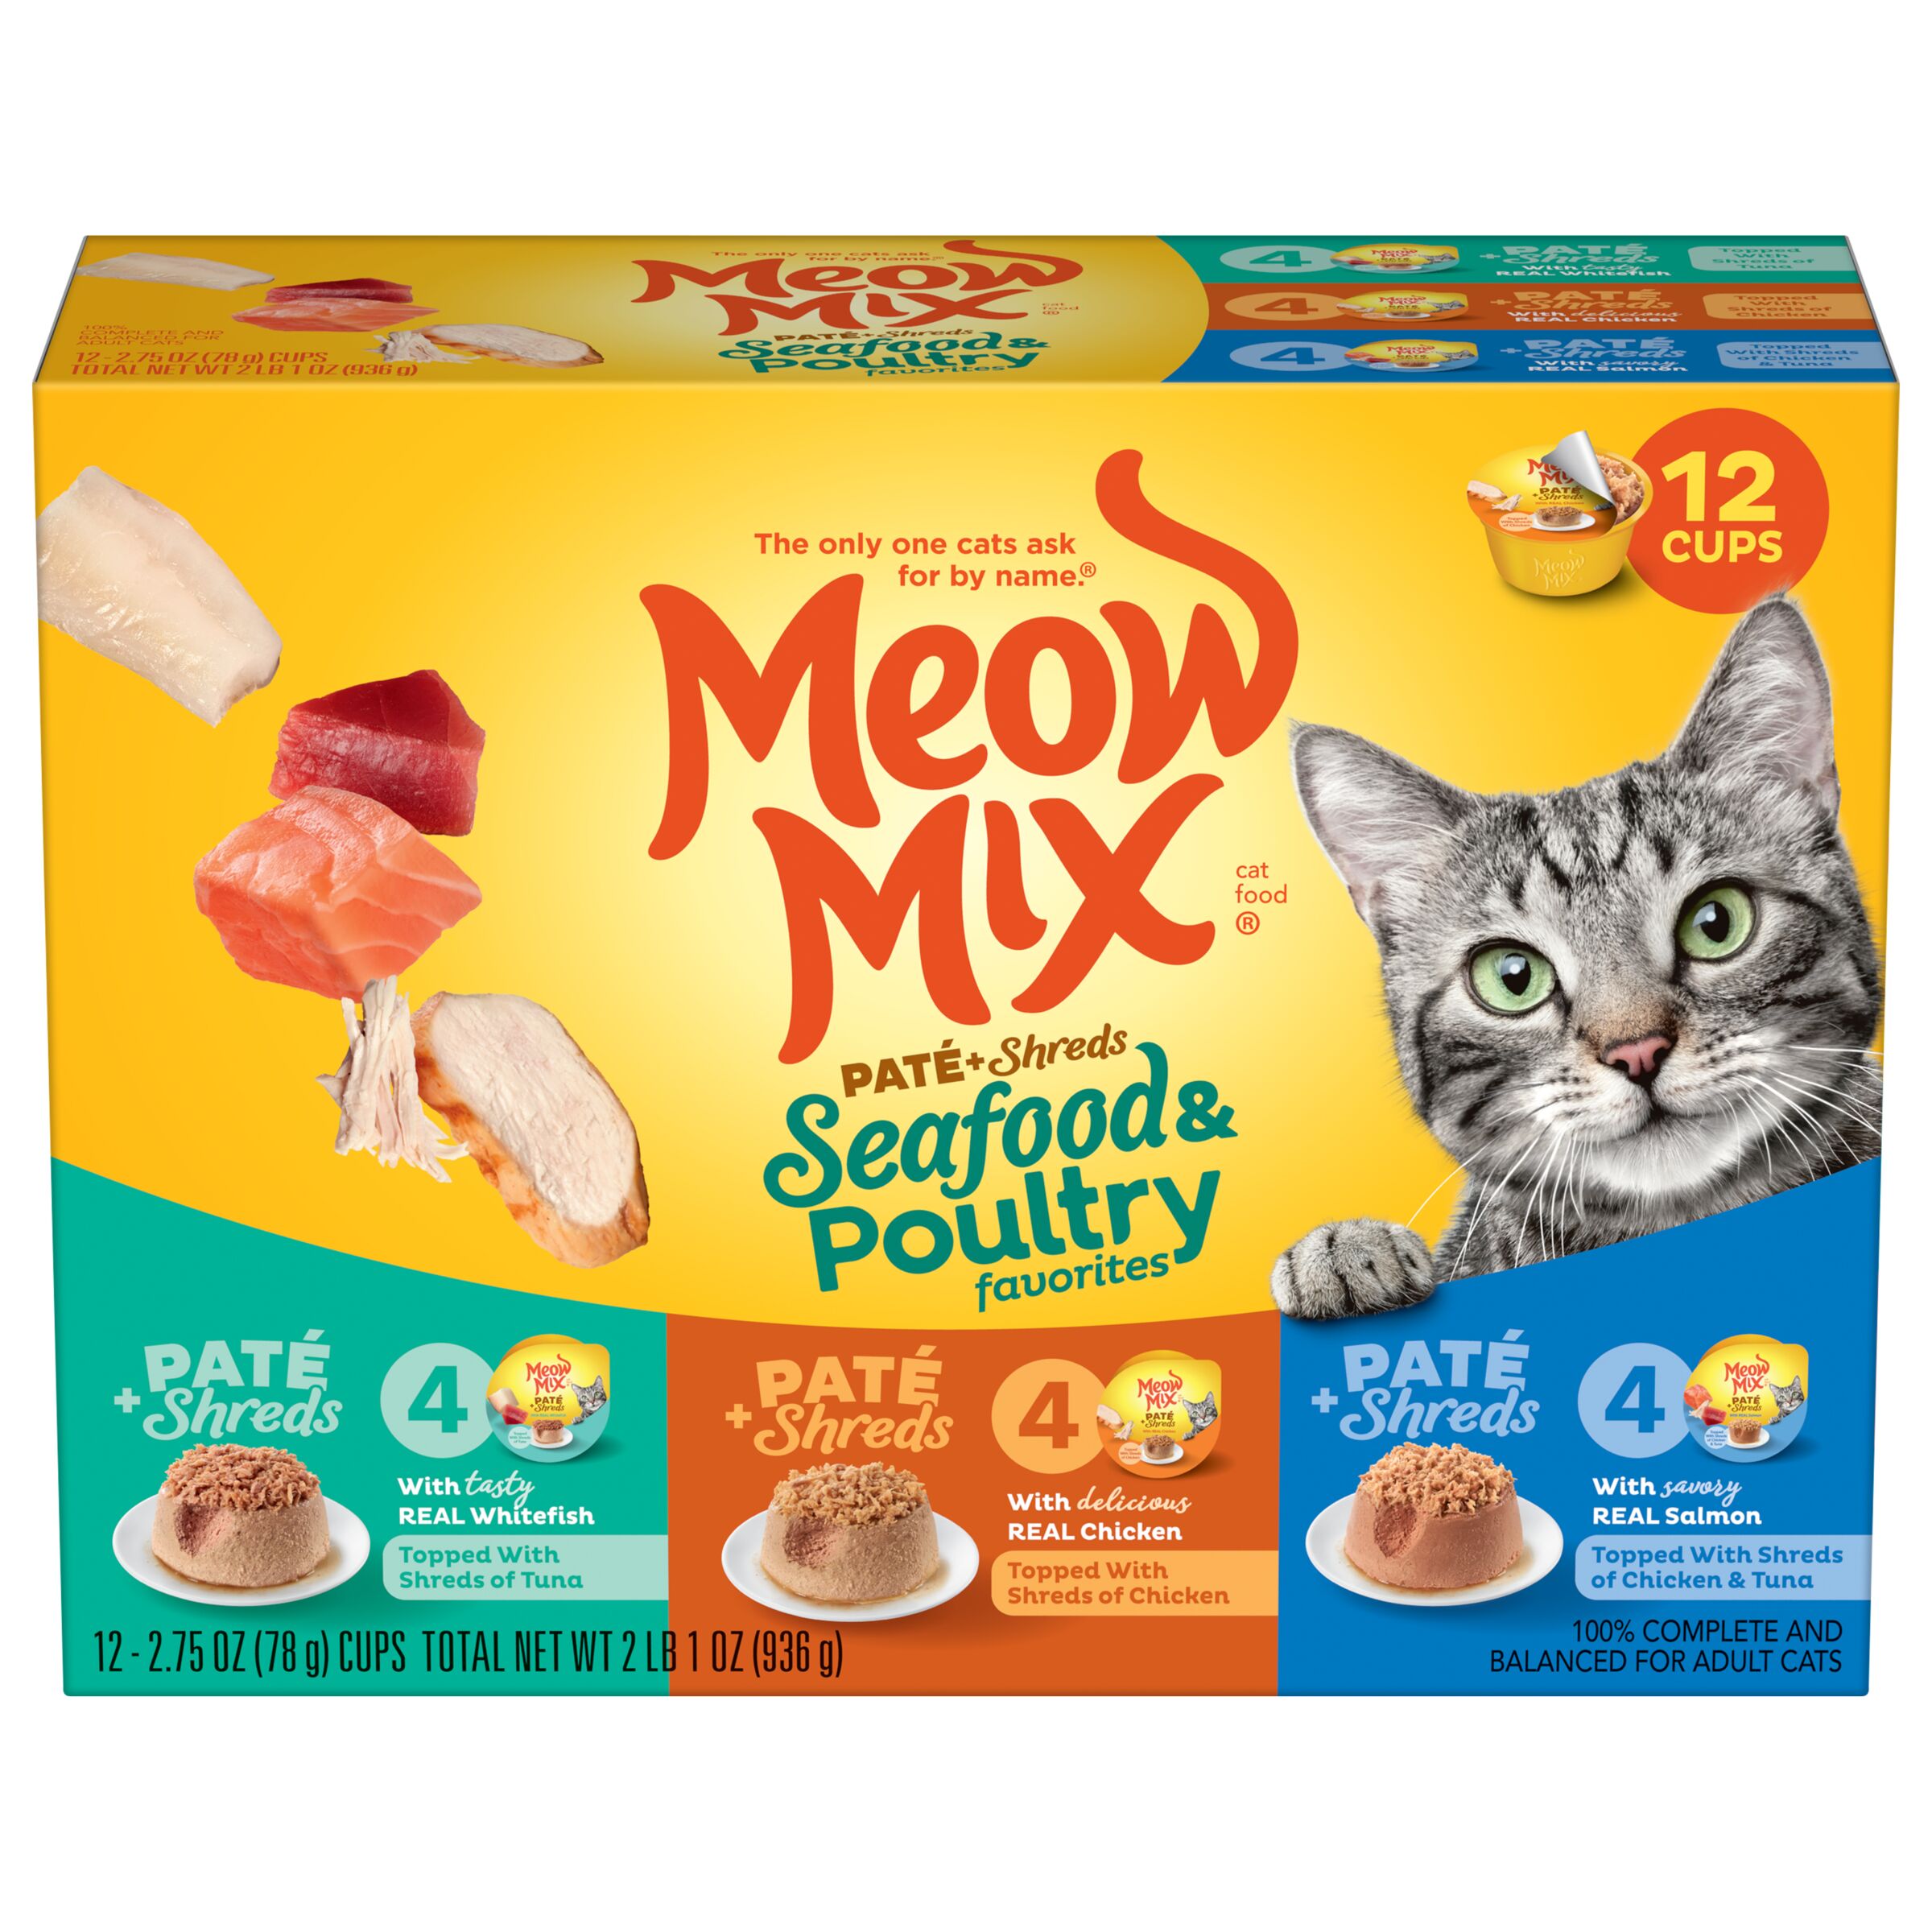 Meow Mix Pate Toppers Seafood & Poultry Variety Pack Wet Cat Food, 12 Cups - image 1 of 8